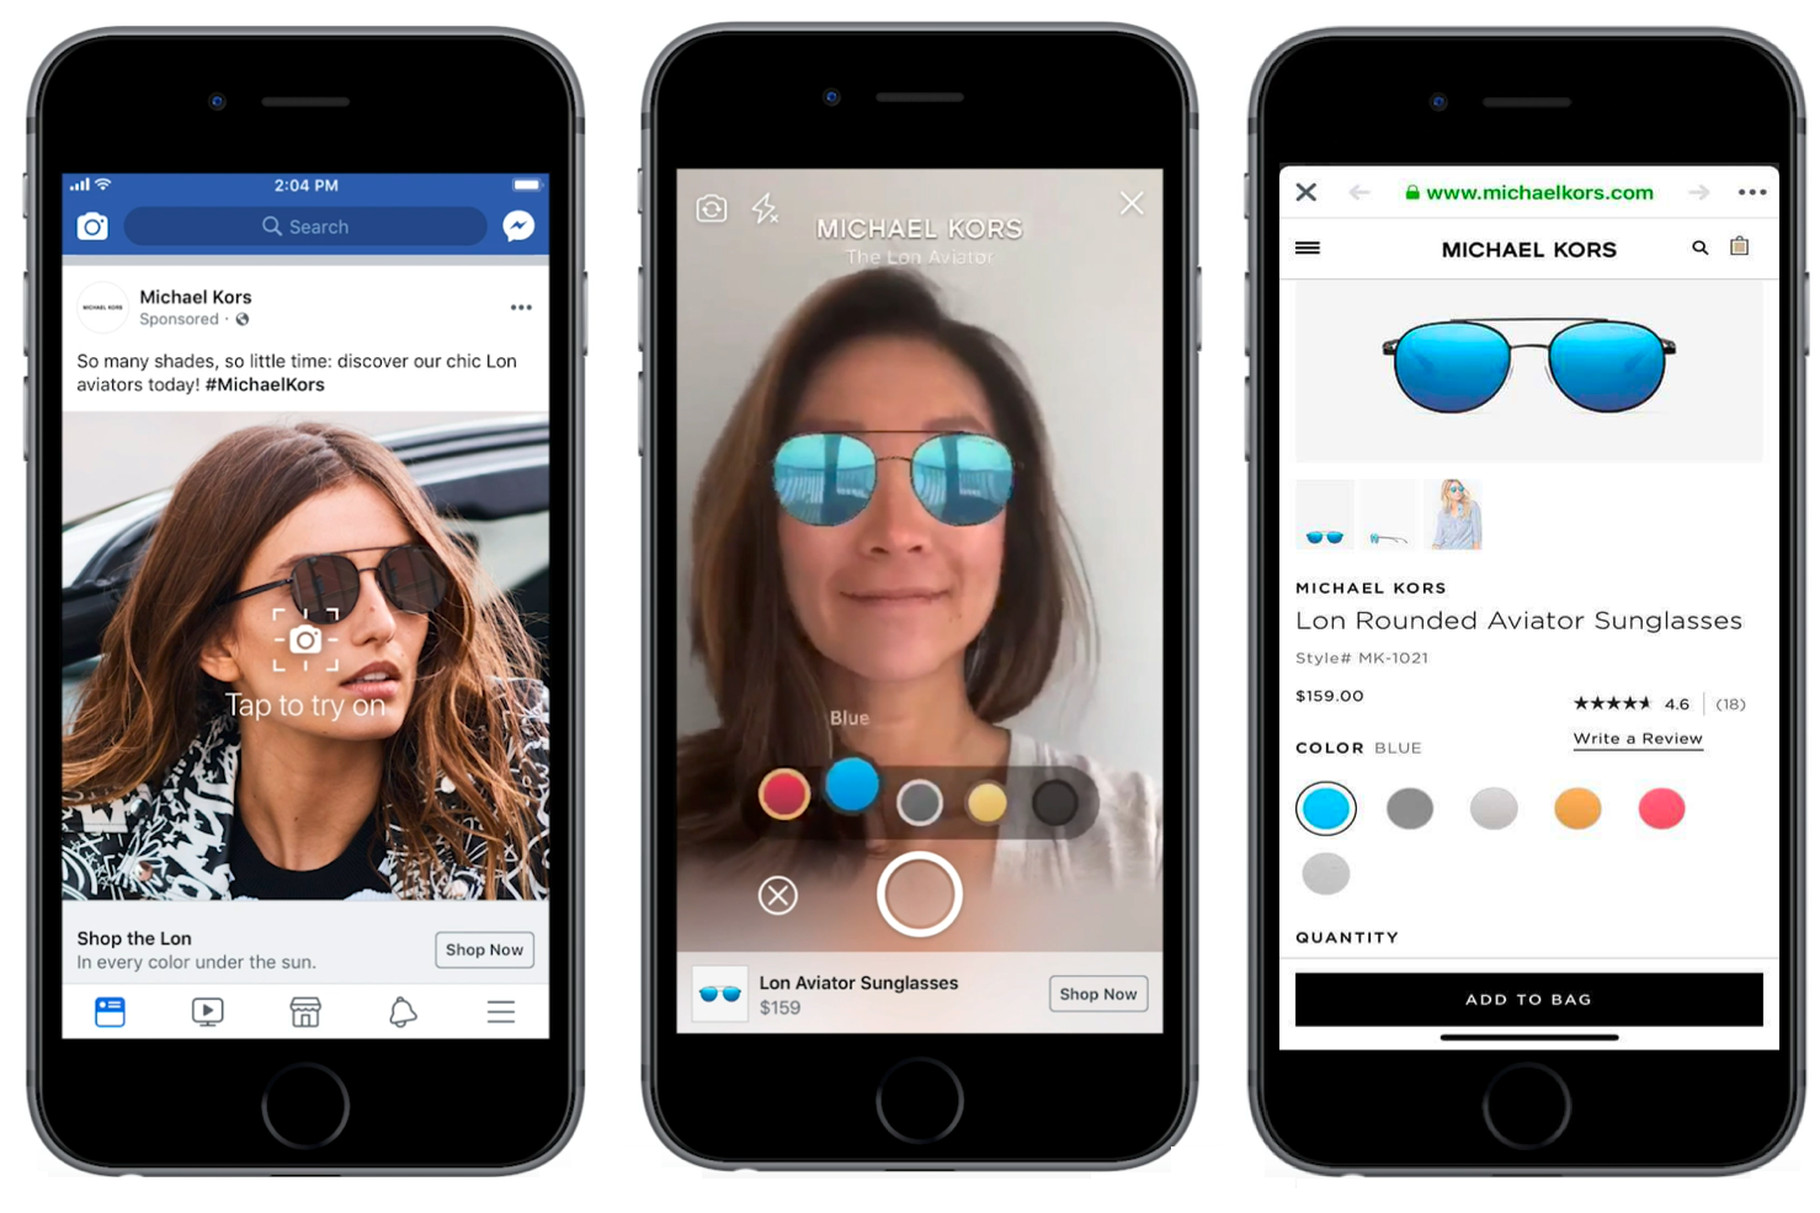 Facebook starts testing AR ads in the News Feed